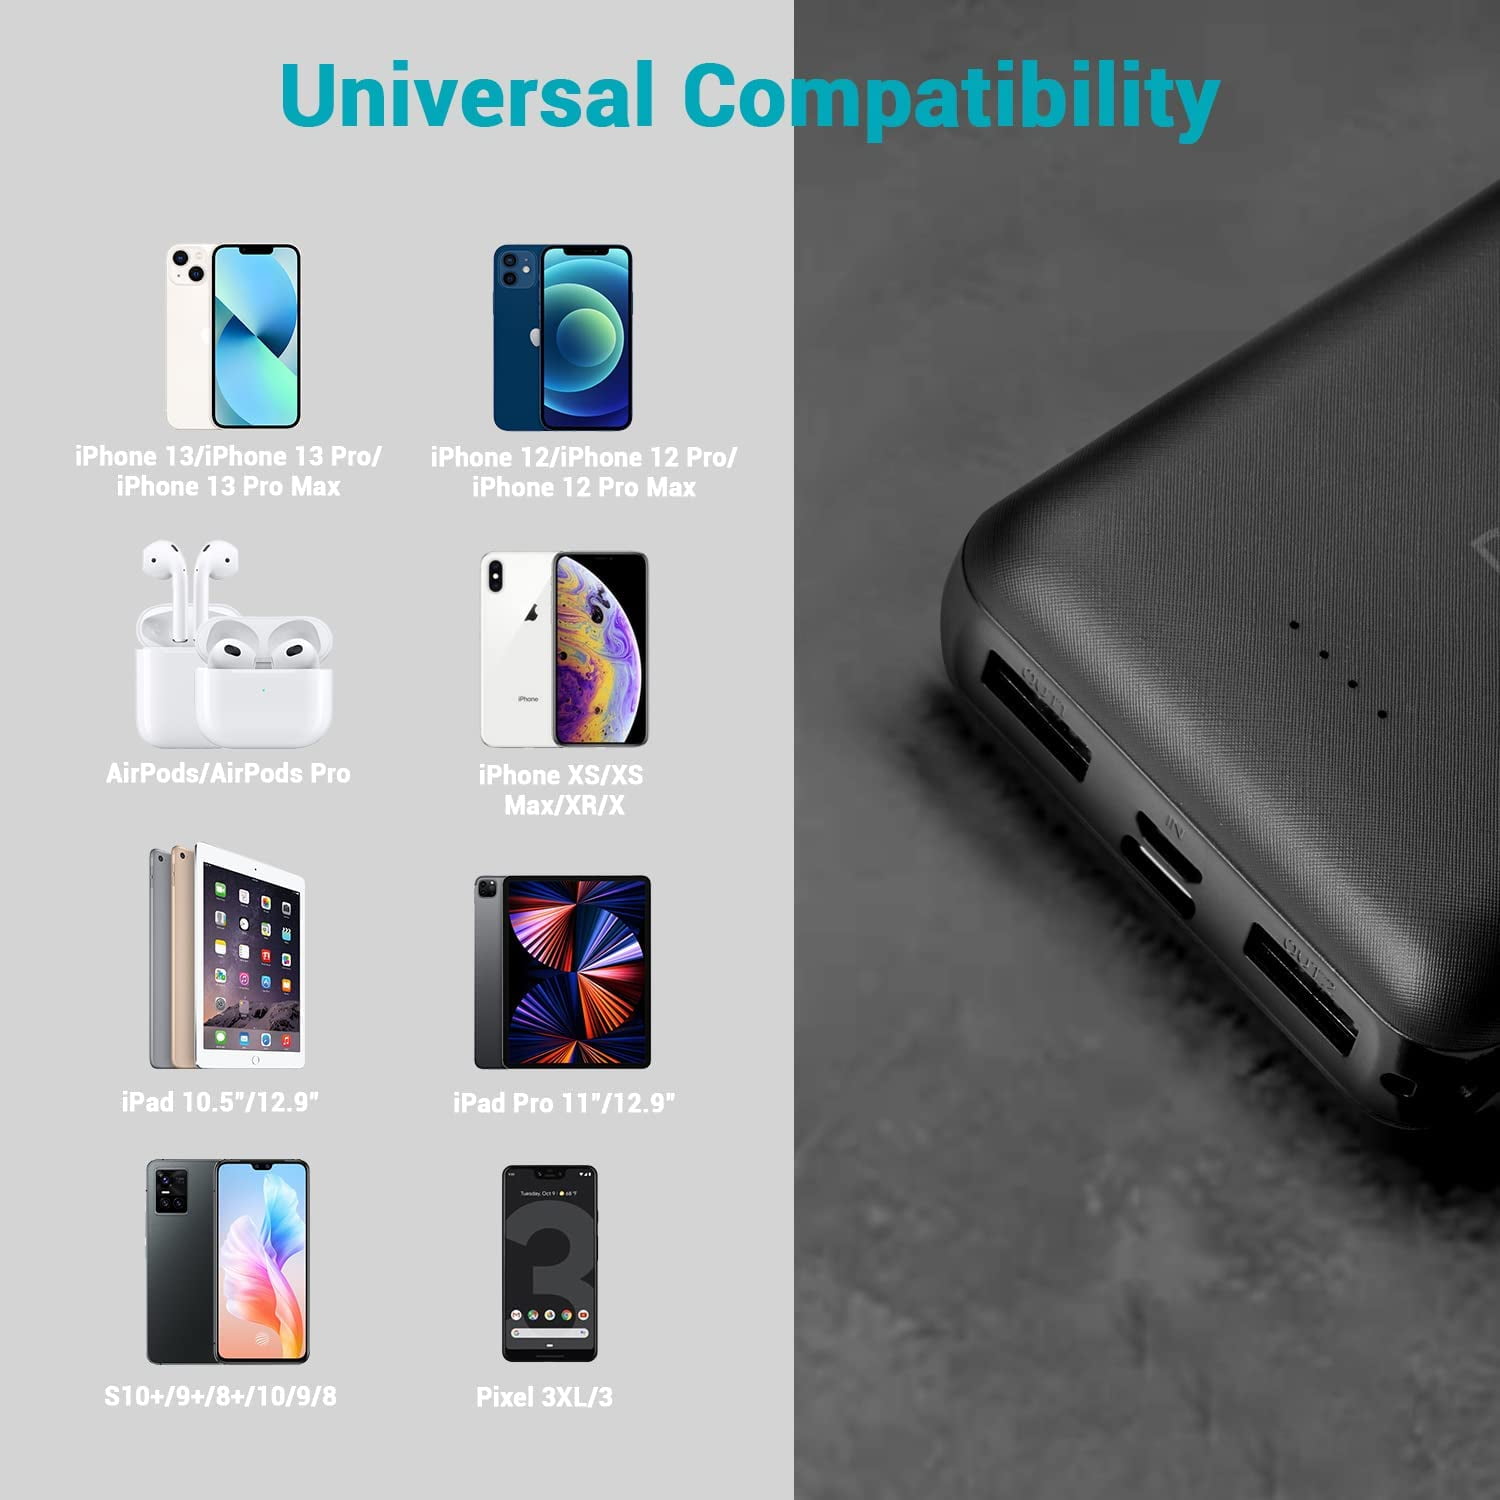 Dr. Prepare Portable Charger 10000mAh for Heated Vest/Jacket,Type-C  Input&Android USB Output Power Bank,Black 